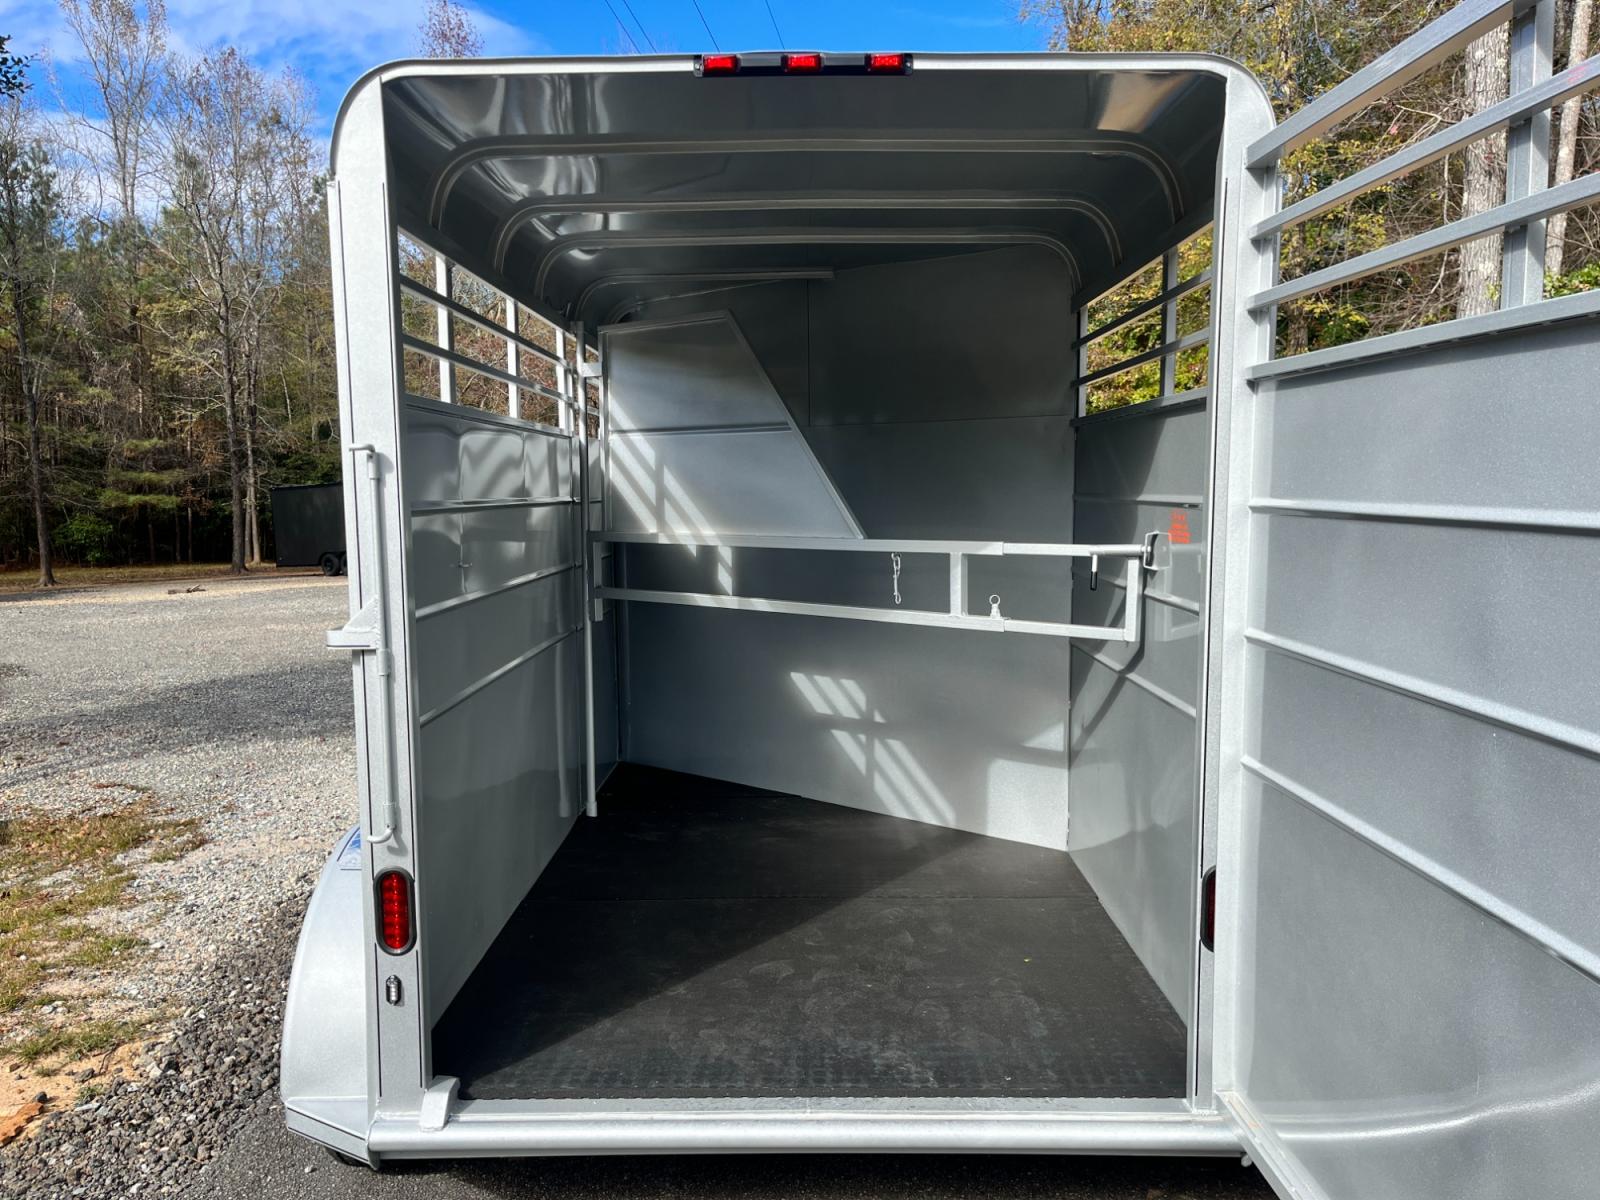 2023 Silver Metallic Calico 2 Horse Slant , located at 1330 Rainey Rd., Macon, 31220, (478) 960-1044, 32.845638, -83.778687 - Brand New 2023 Model 2 Horse Slant Calico Brand Trailer! 6ft Wide X 13ft Long Deluxe Model Tandem Axle Trailer! Easy Close Slant Divider Latch! 16" Radials! Beautiful Silver Metallic Paint is Awesome! Black Pin Striping Looks Fantastic! Fully Caulked Inside and Out to Prevent Rust! The Paint i - Photo #17